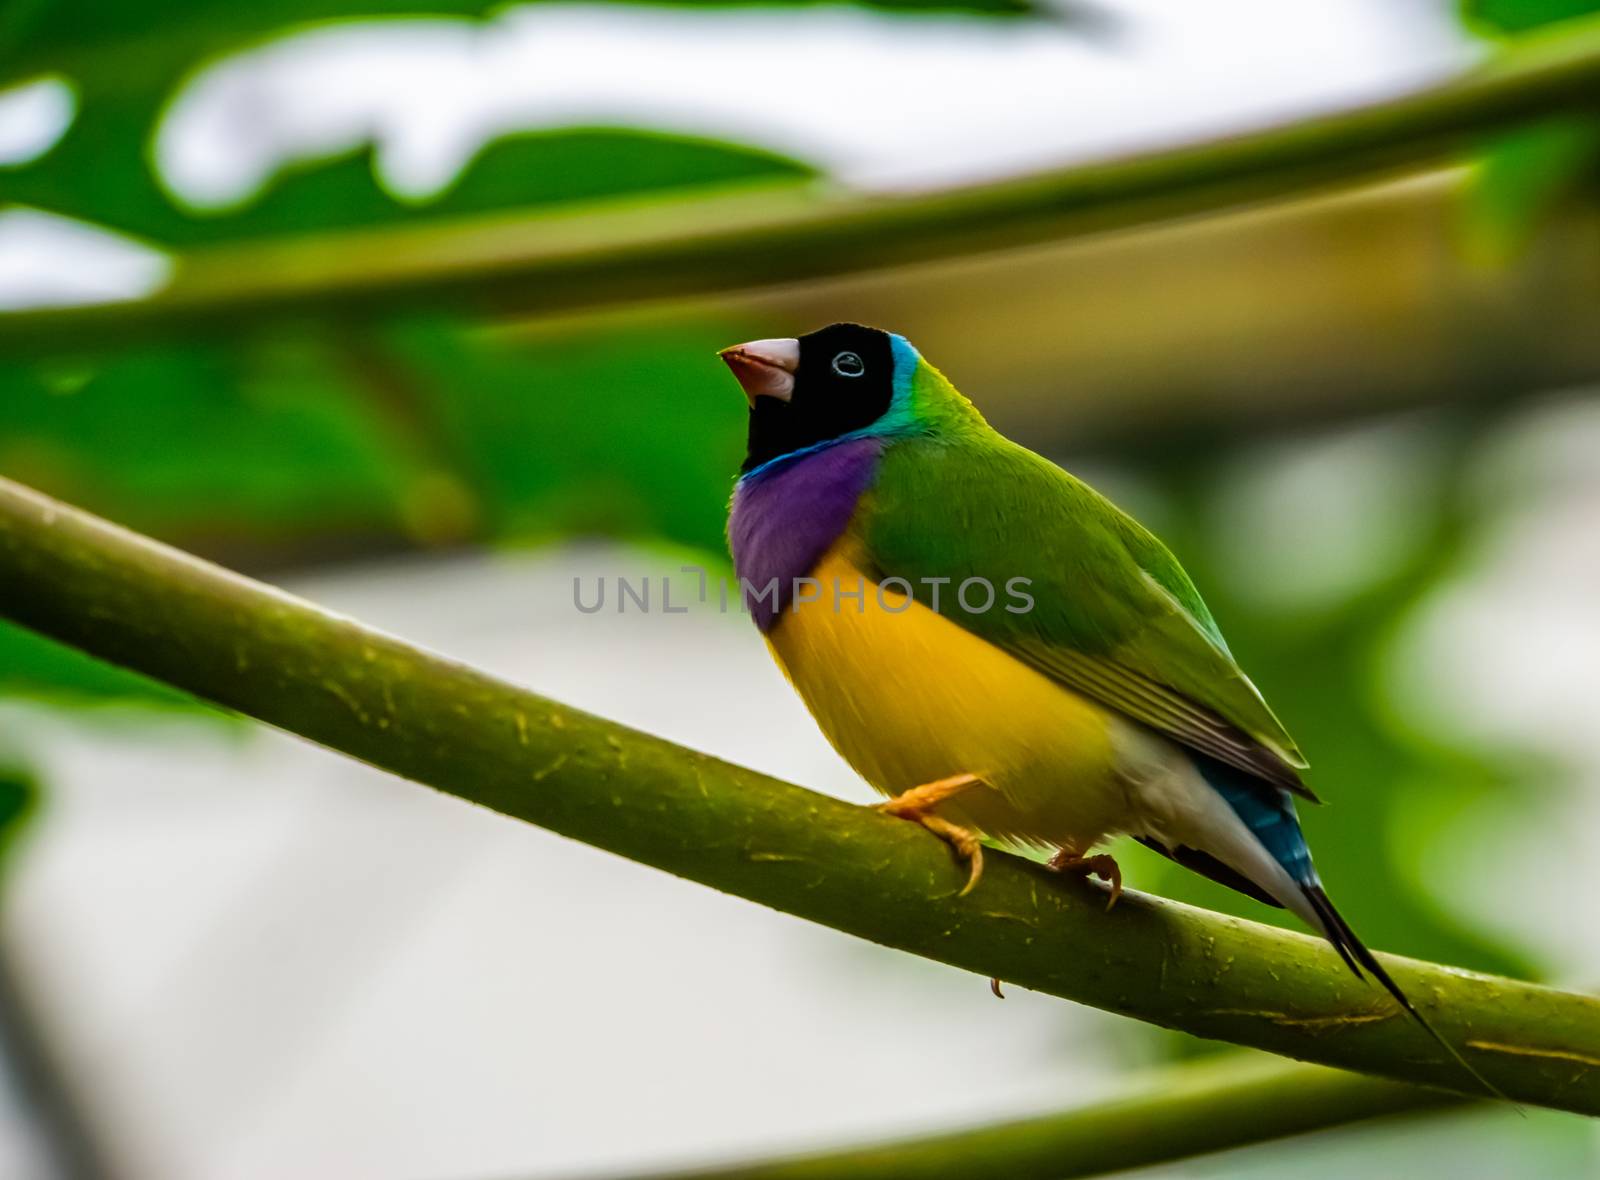 portrait of a black headed gouldian finch, colorful tropical bird specie from Australia